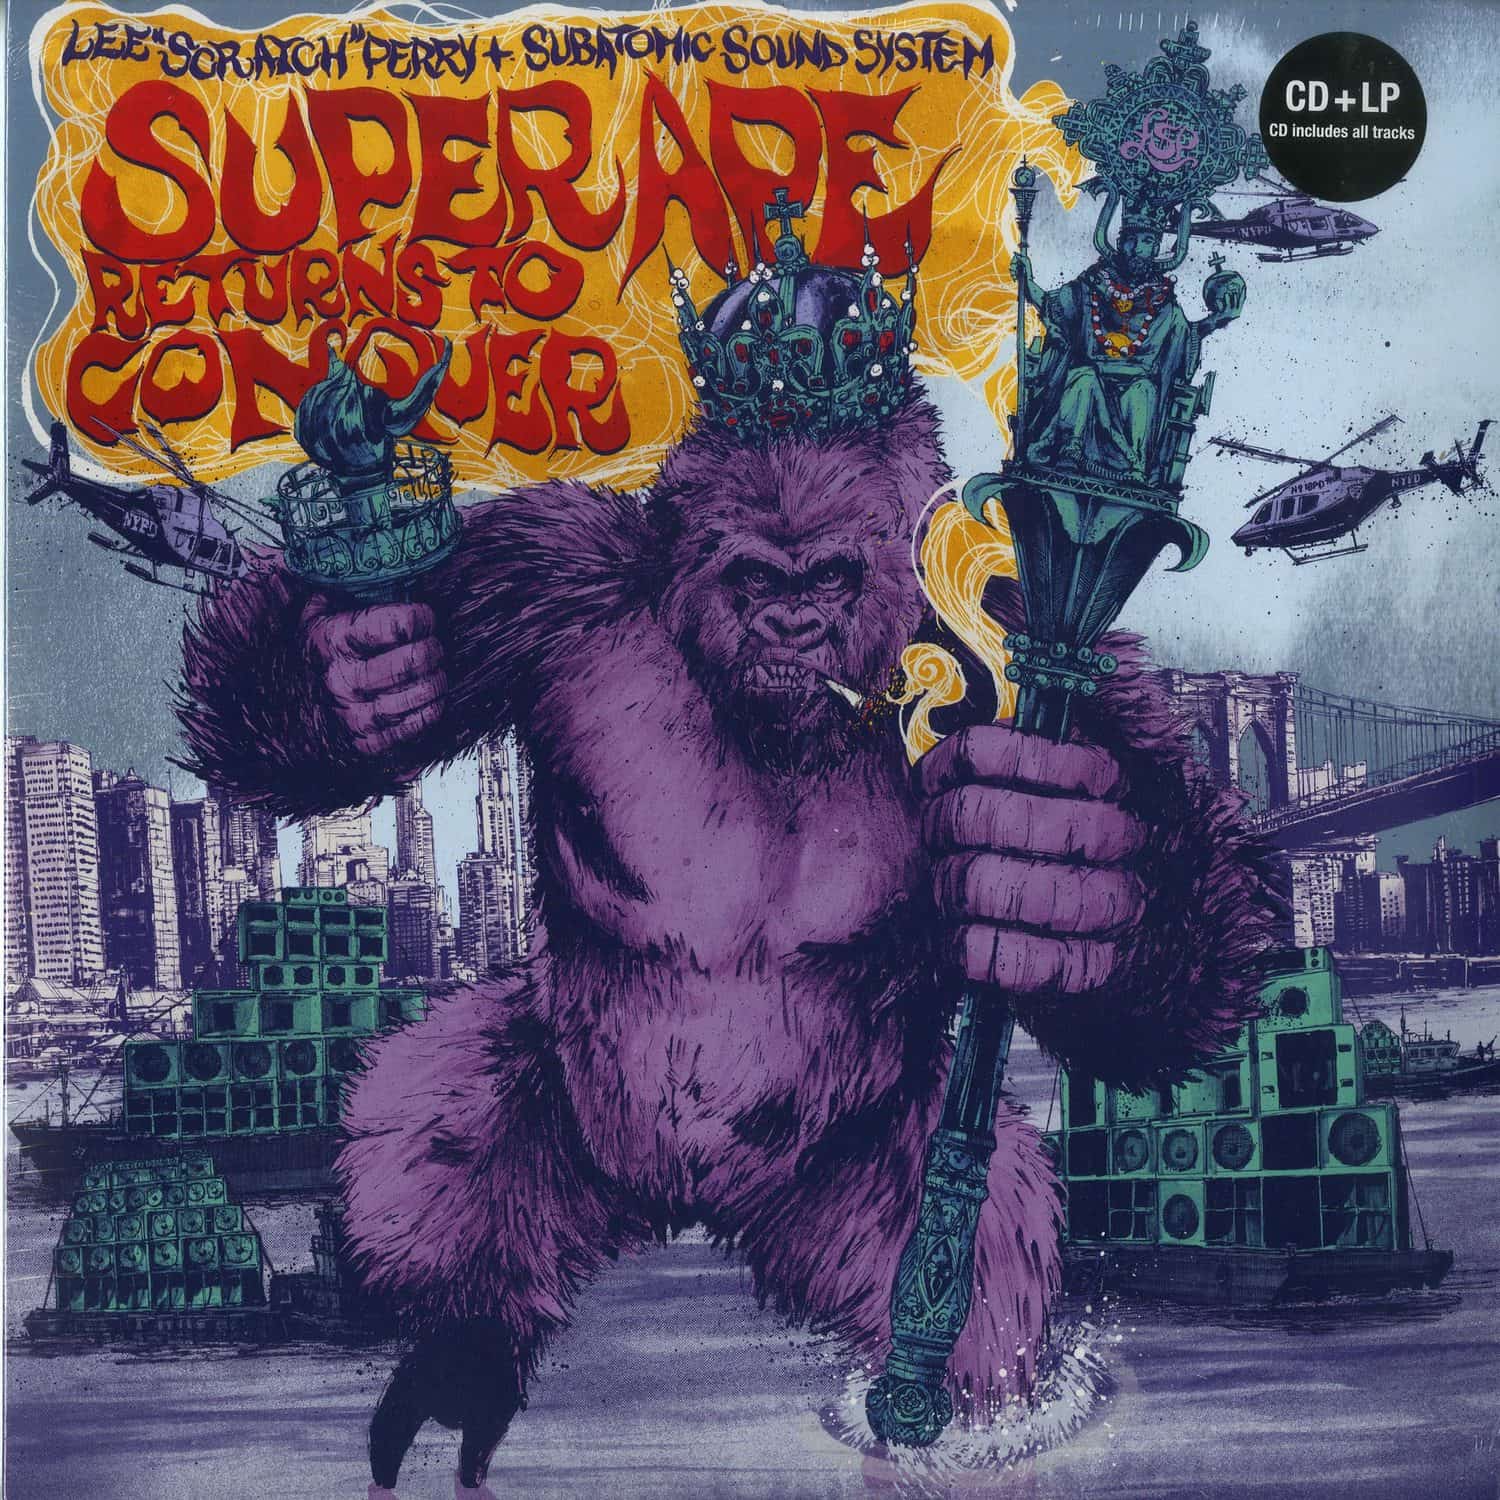 Lee Scratch Perry & Subatomic Sound System - SUPER APE RETURNS TO CONQUER 